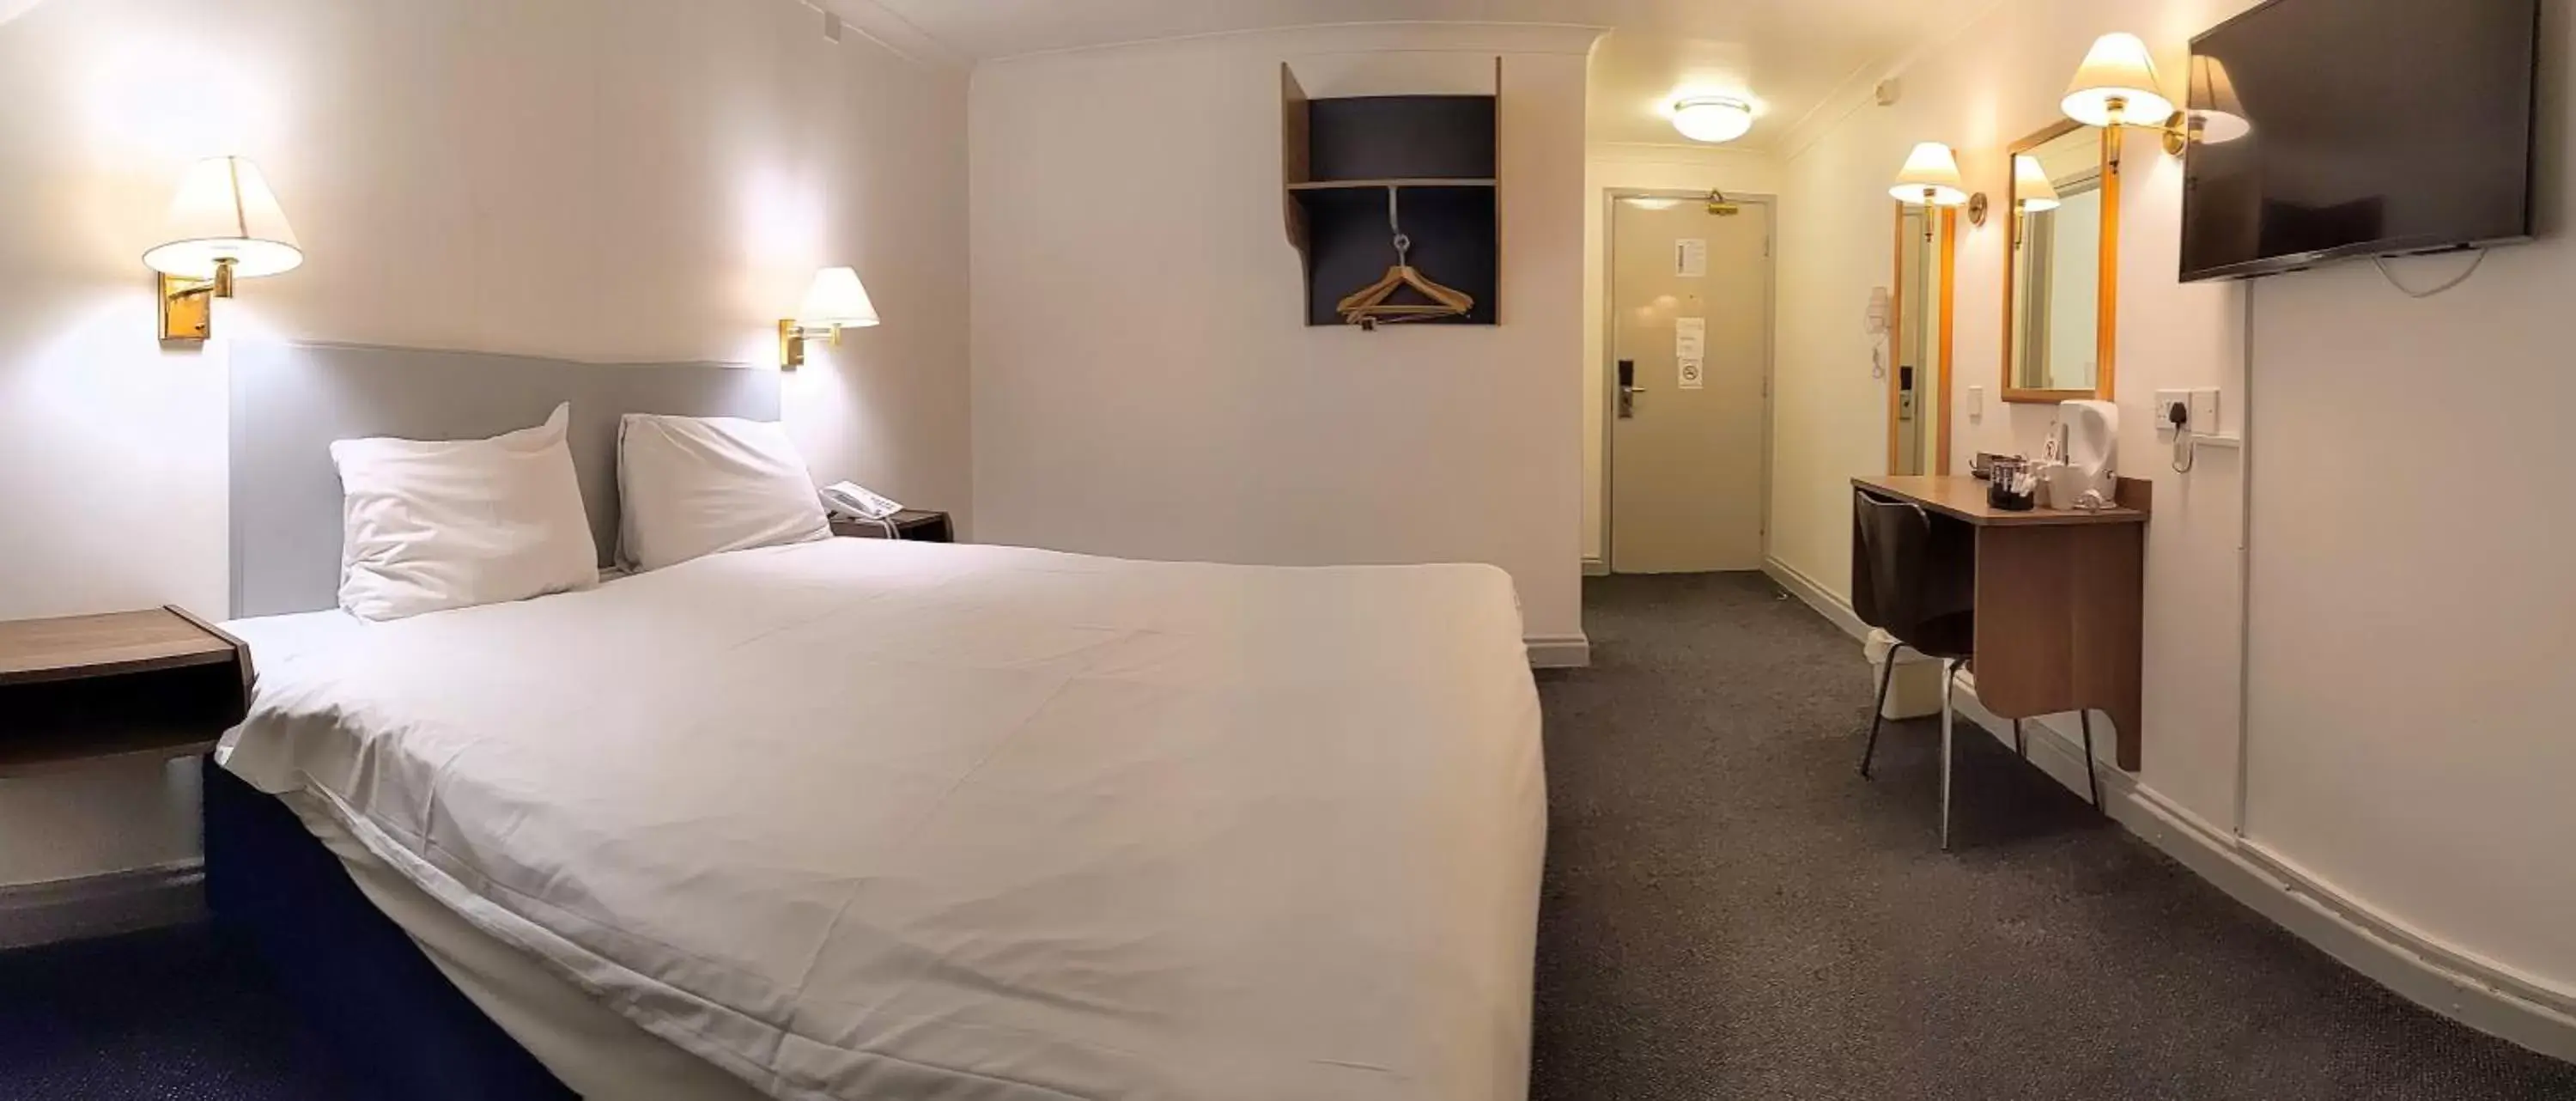 Photo of the whole room in 247Hotel.com